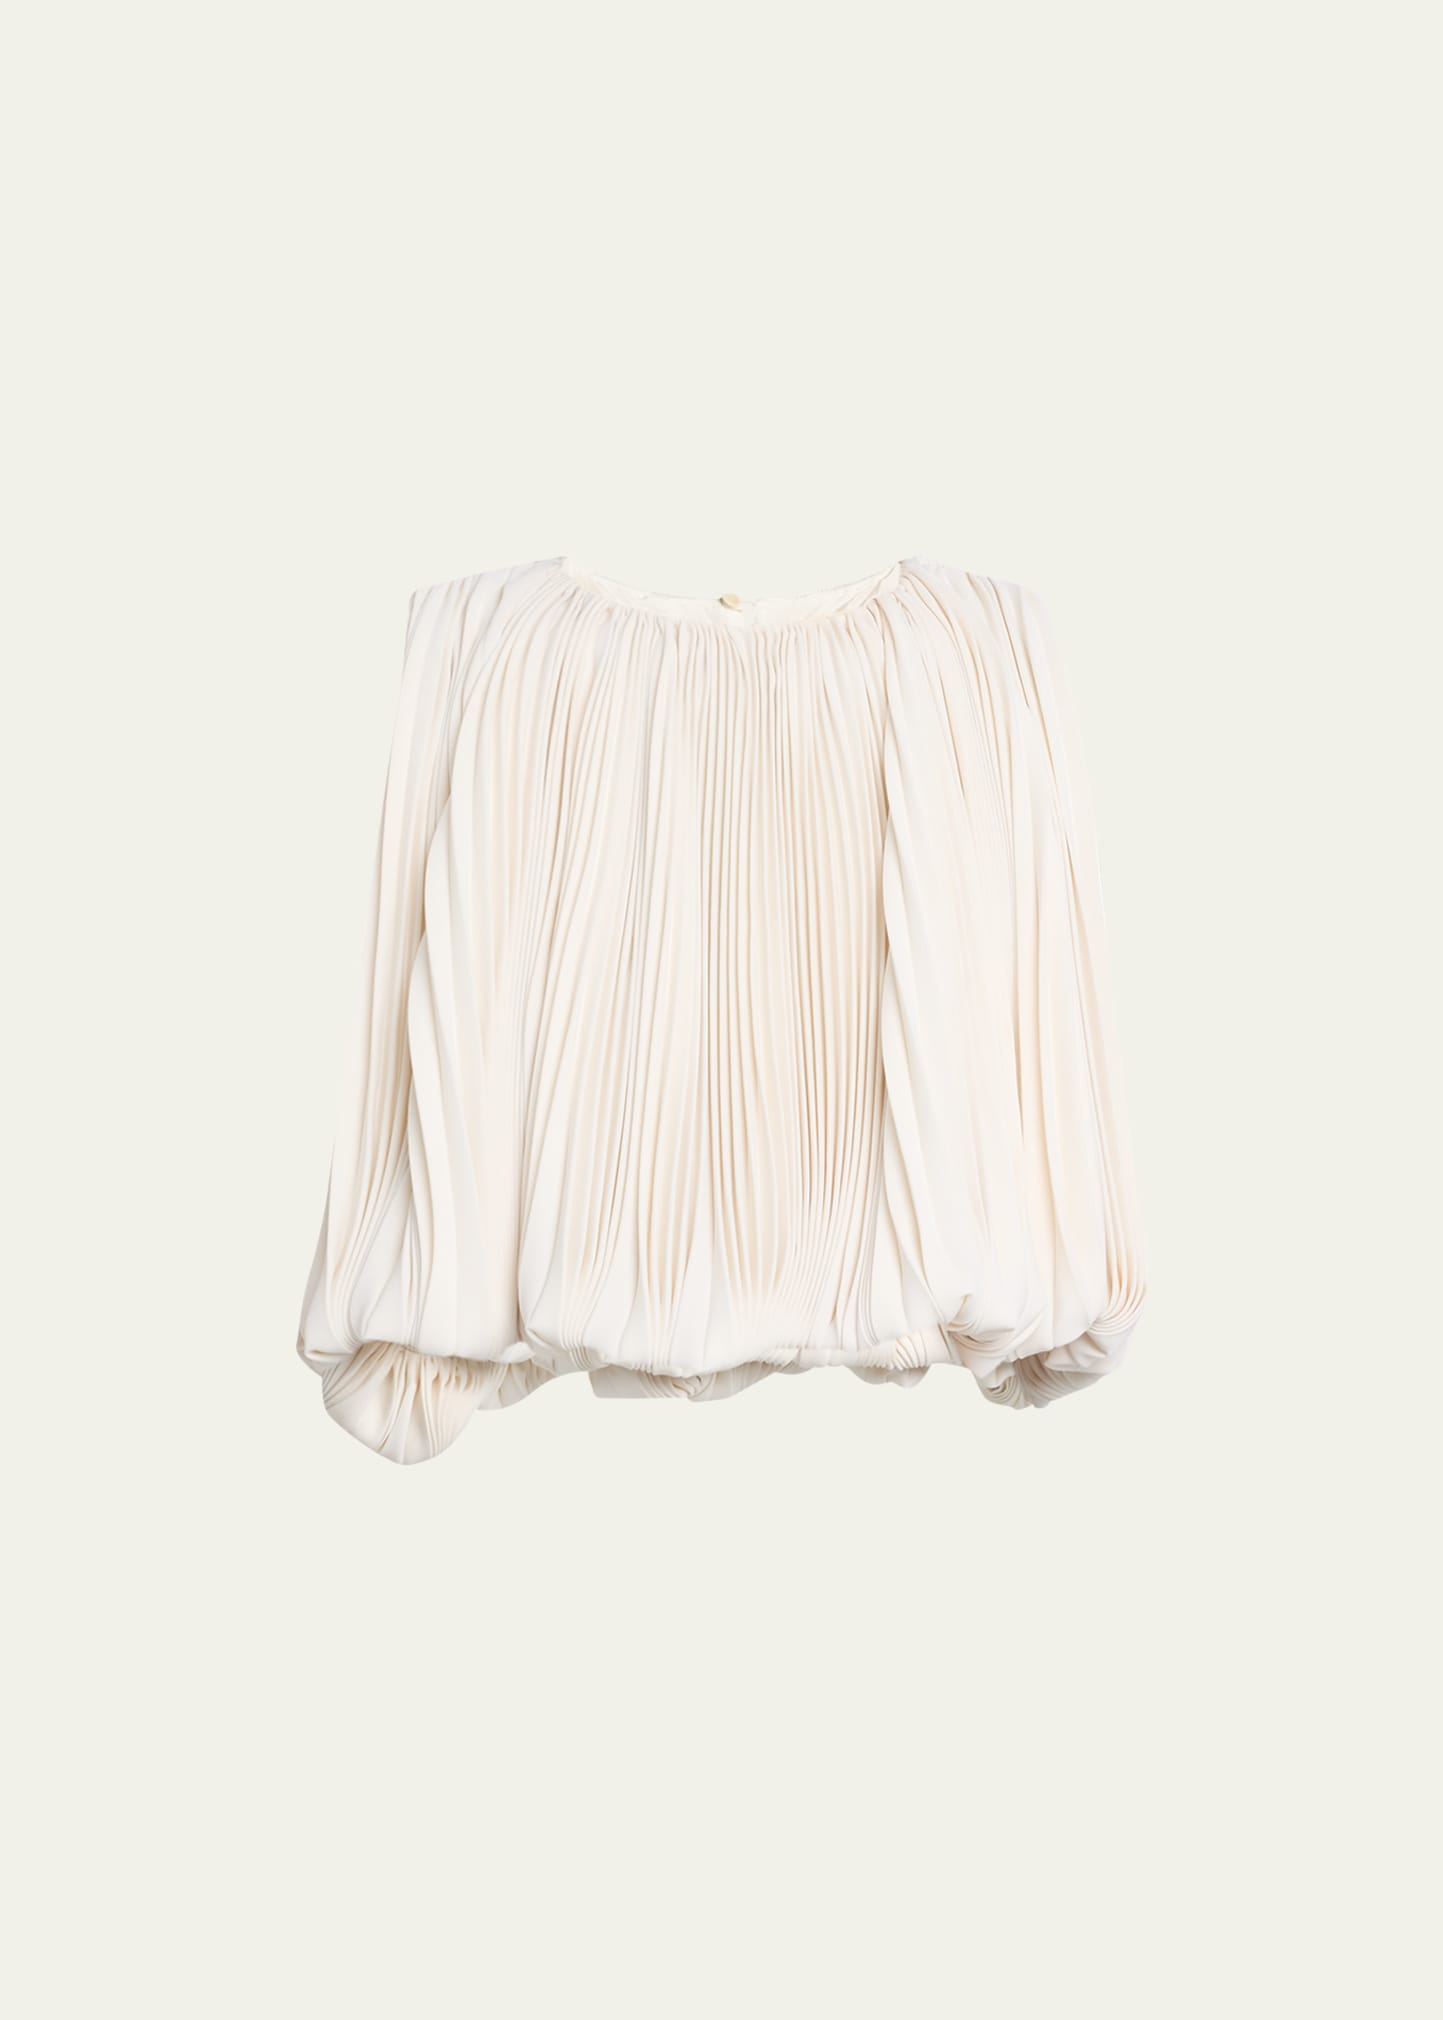 Heirlome Beatrice Sunburst Pleated Bubble Crop Top In Antique Ivory